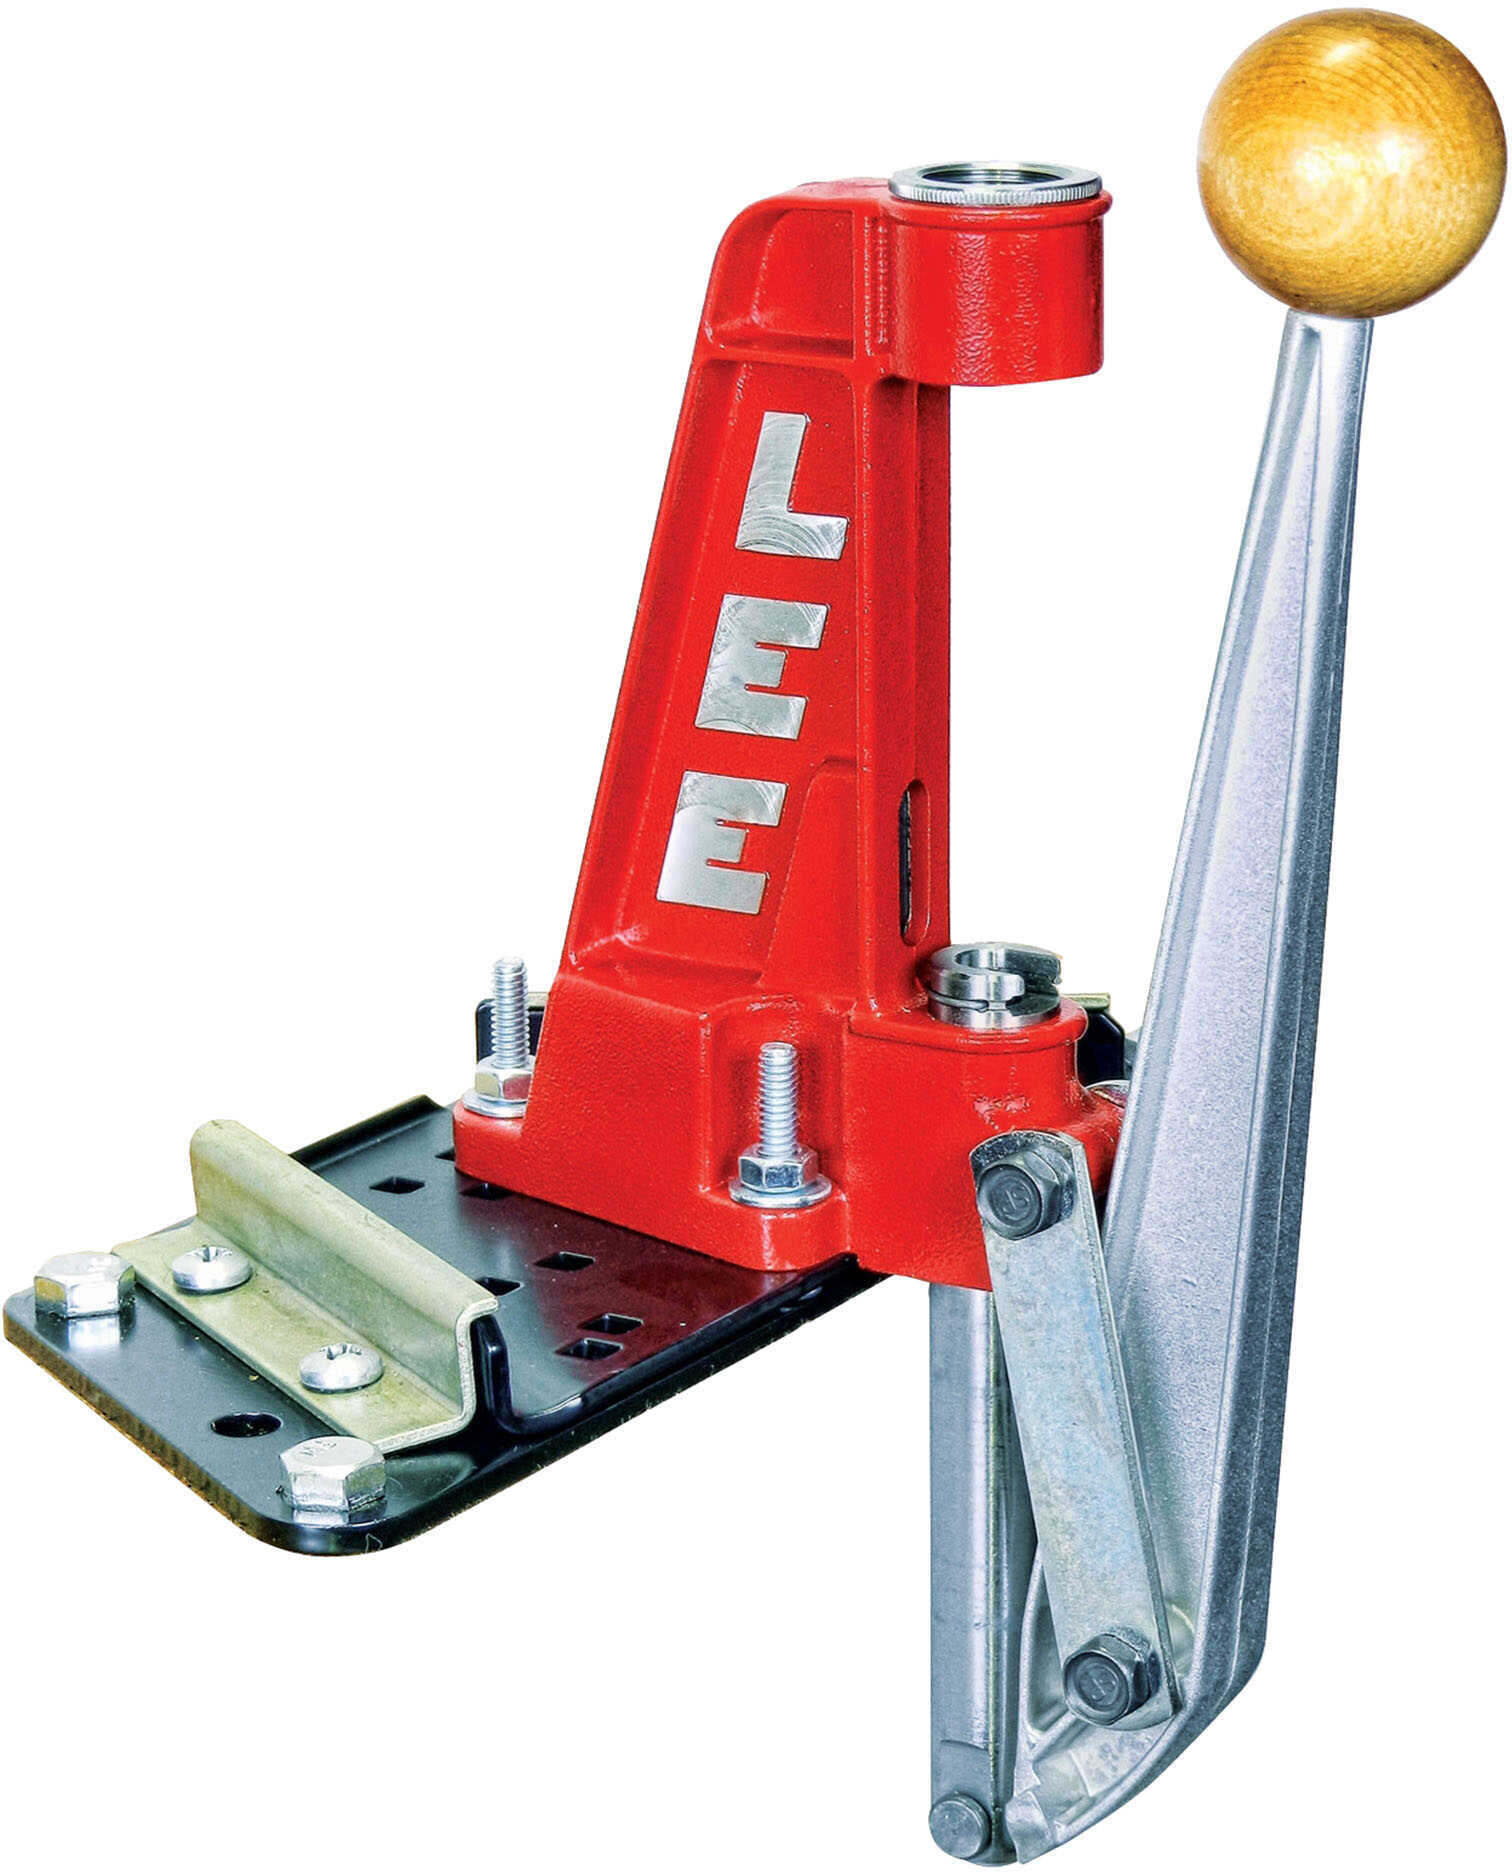 Lee Breech Lock Reloader Press - All Cartridges Up To .460 Weatherby Mag 50/Rd Per hr